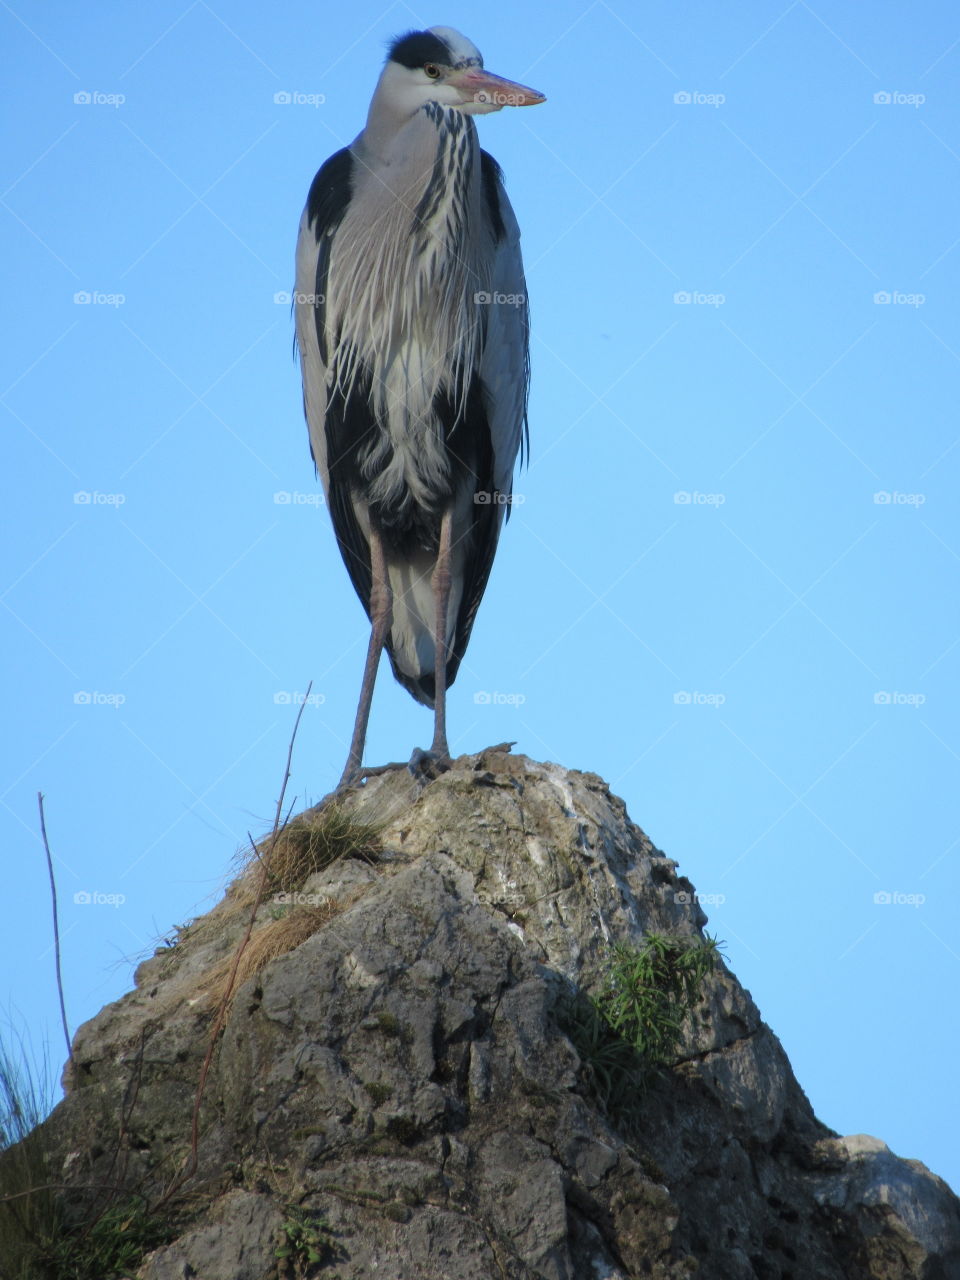 A statuesque looking  Heron at cologne zoo germany